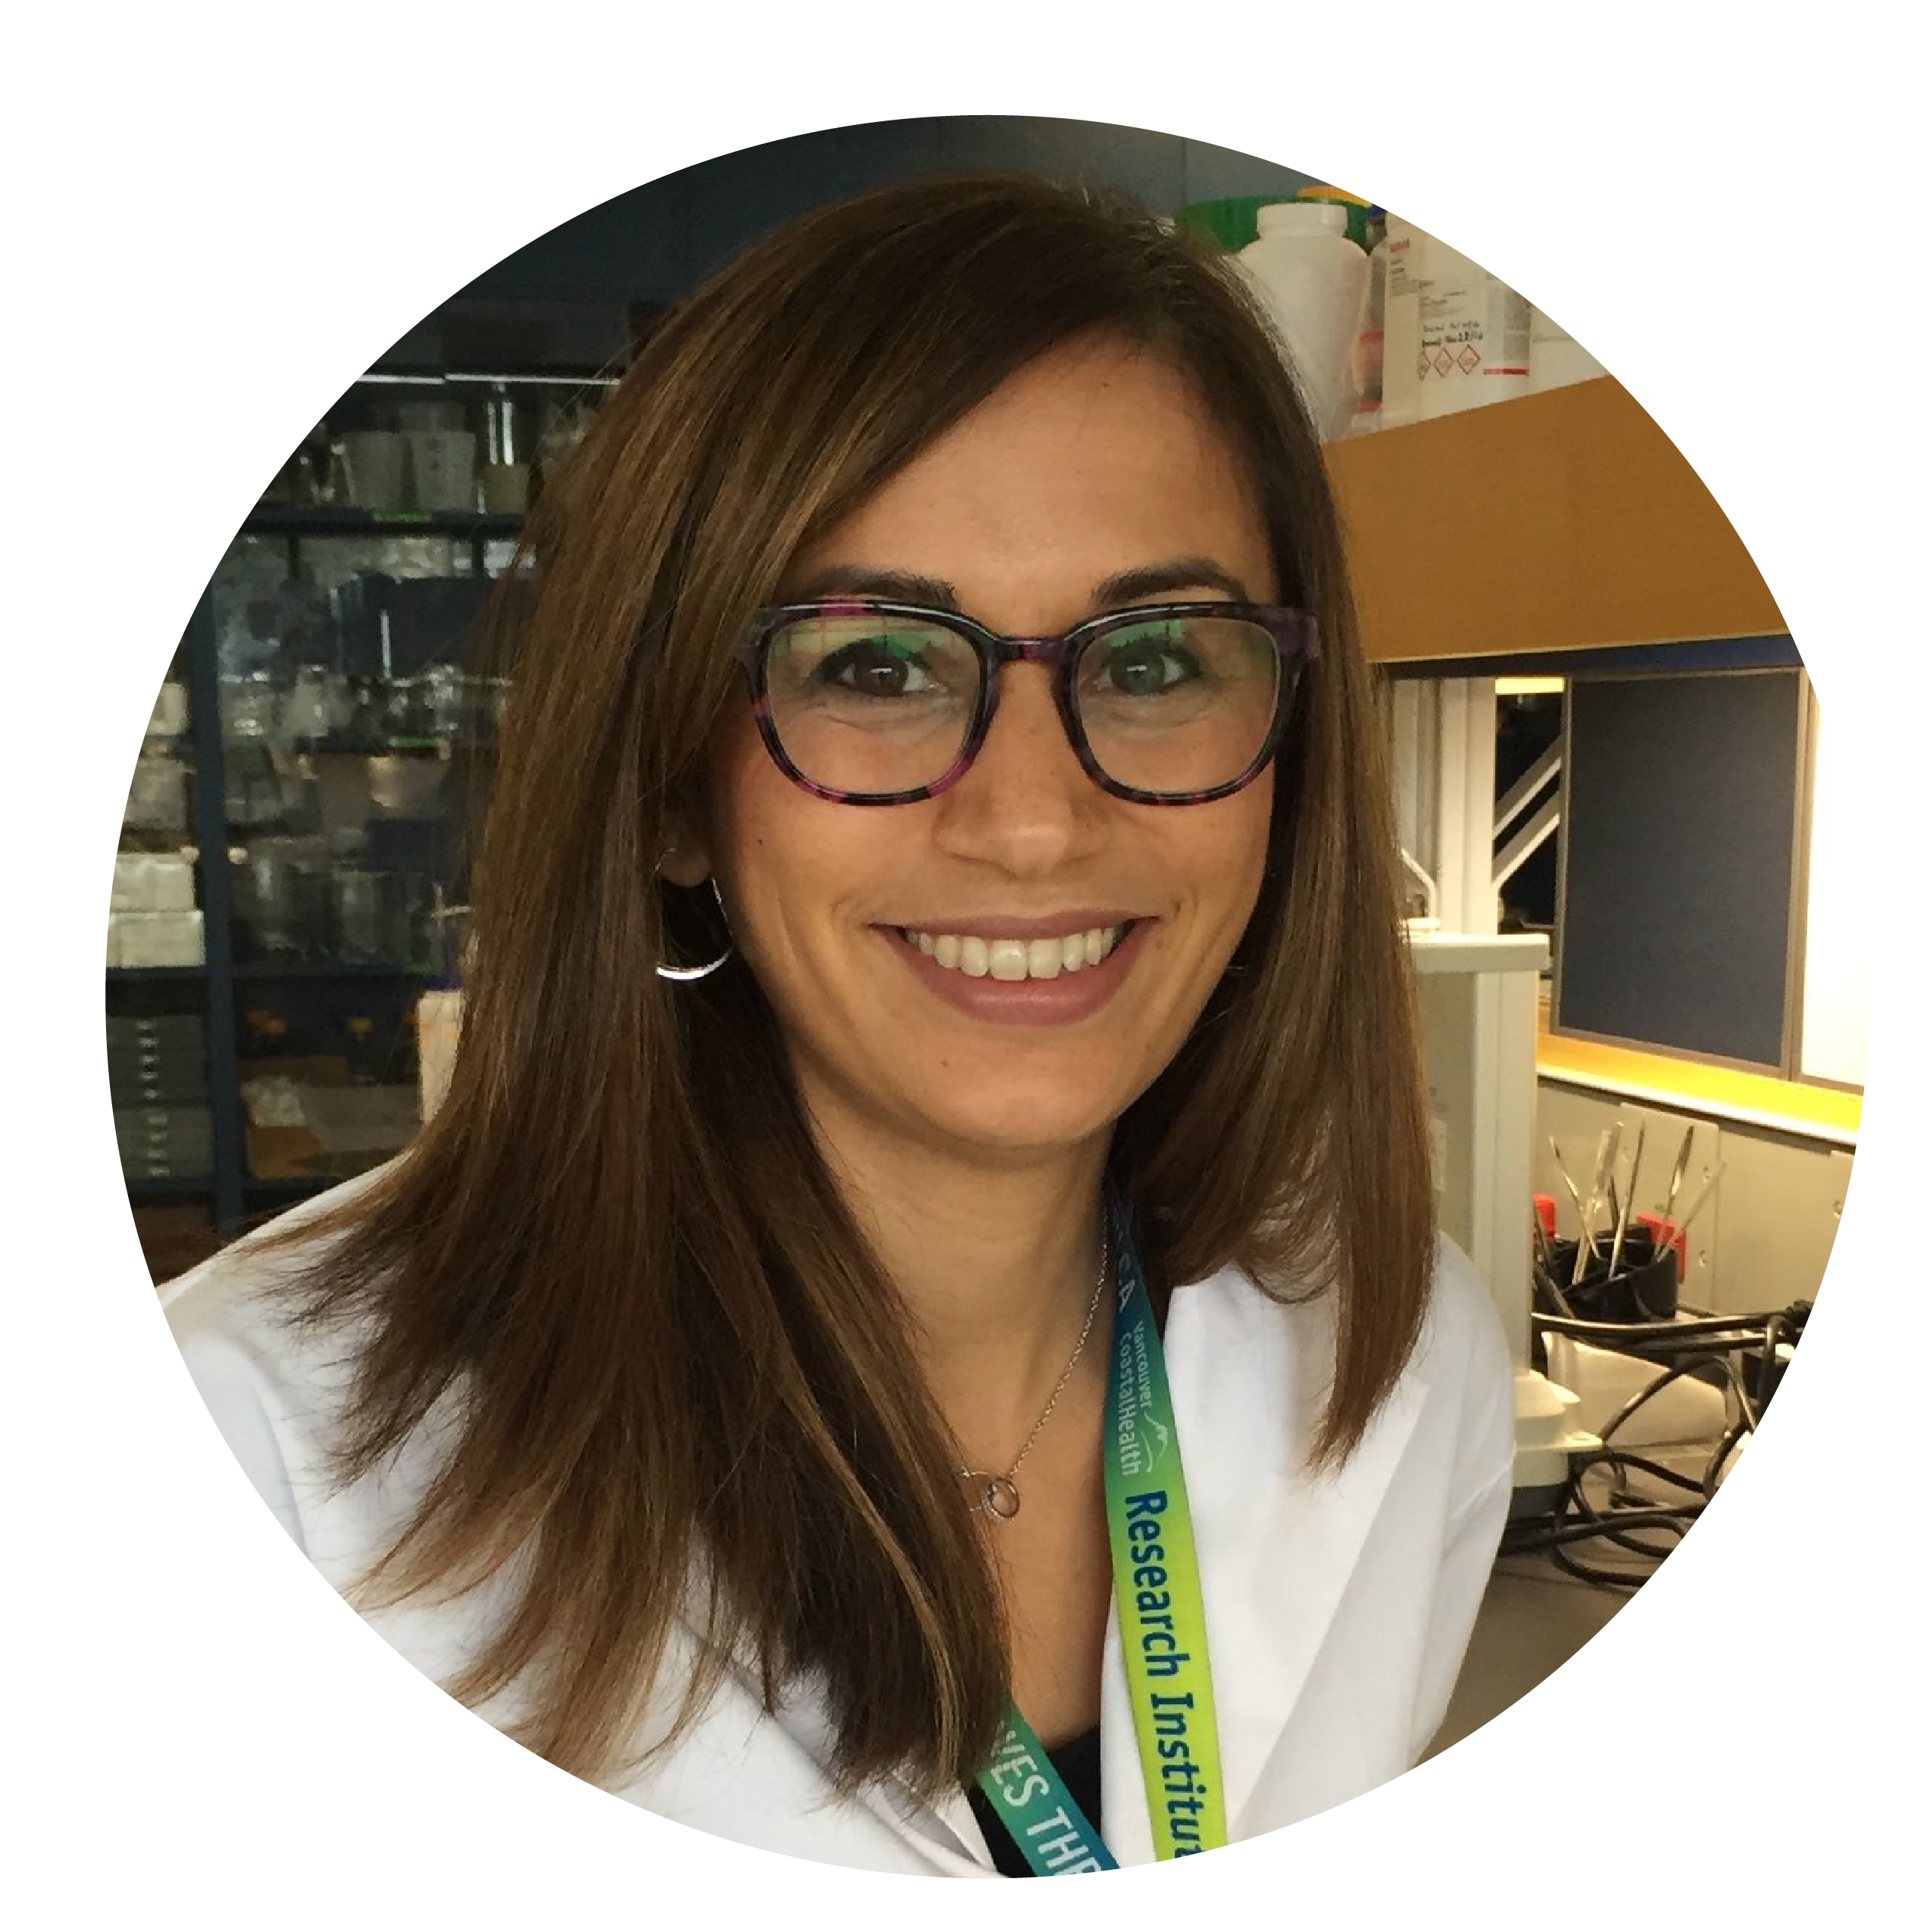 A woman in a white coat, green lanyard and brown glasses with medium lenght brown hair